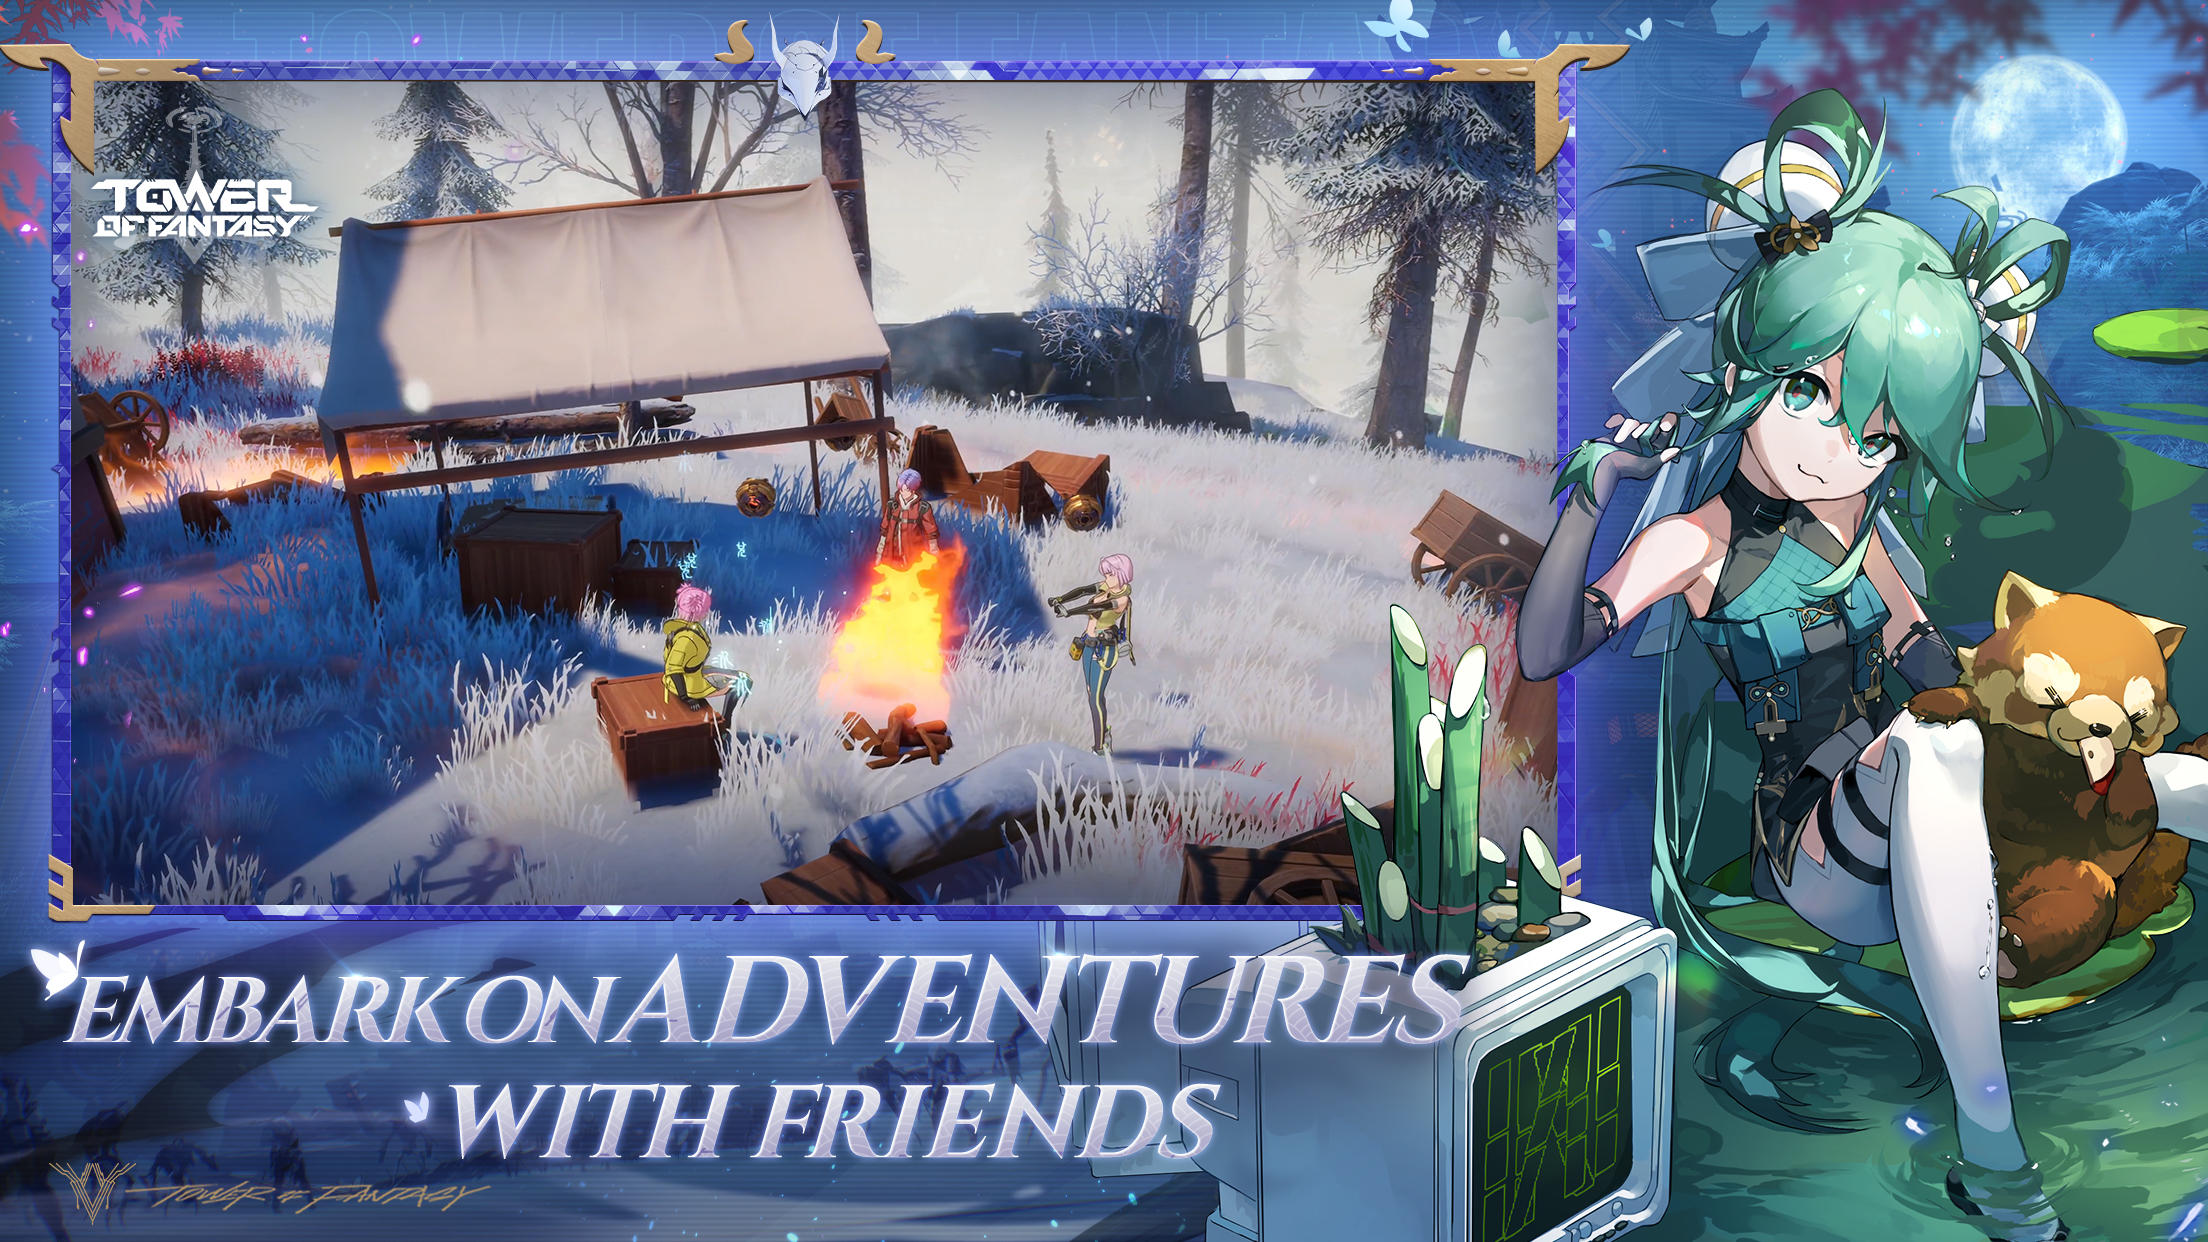 How to download the Tower of Fantasy APK file